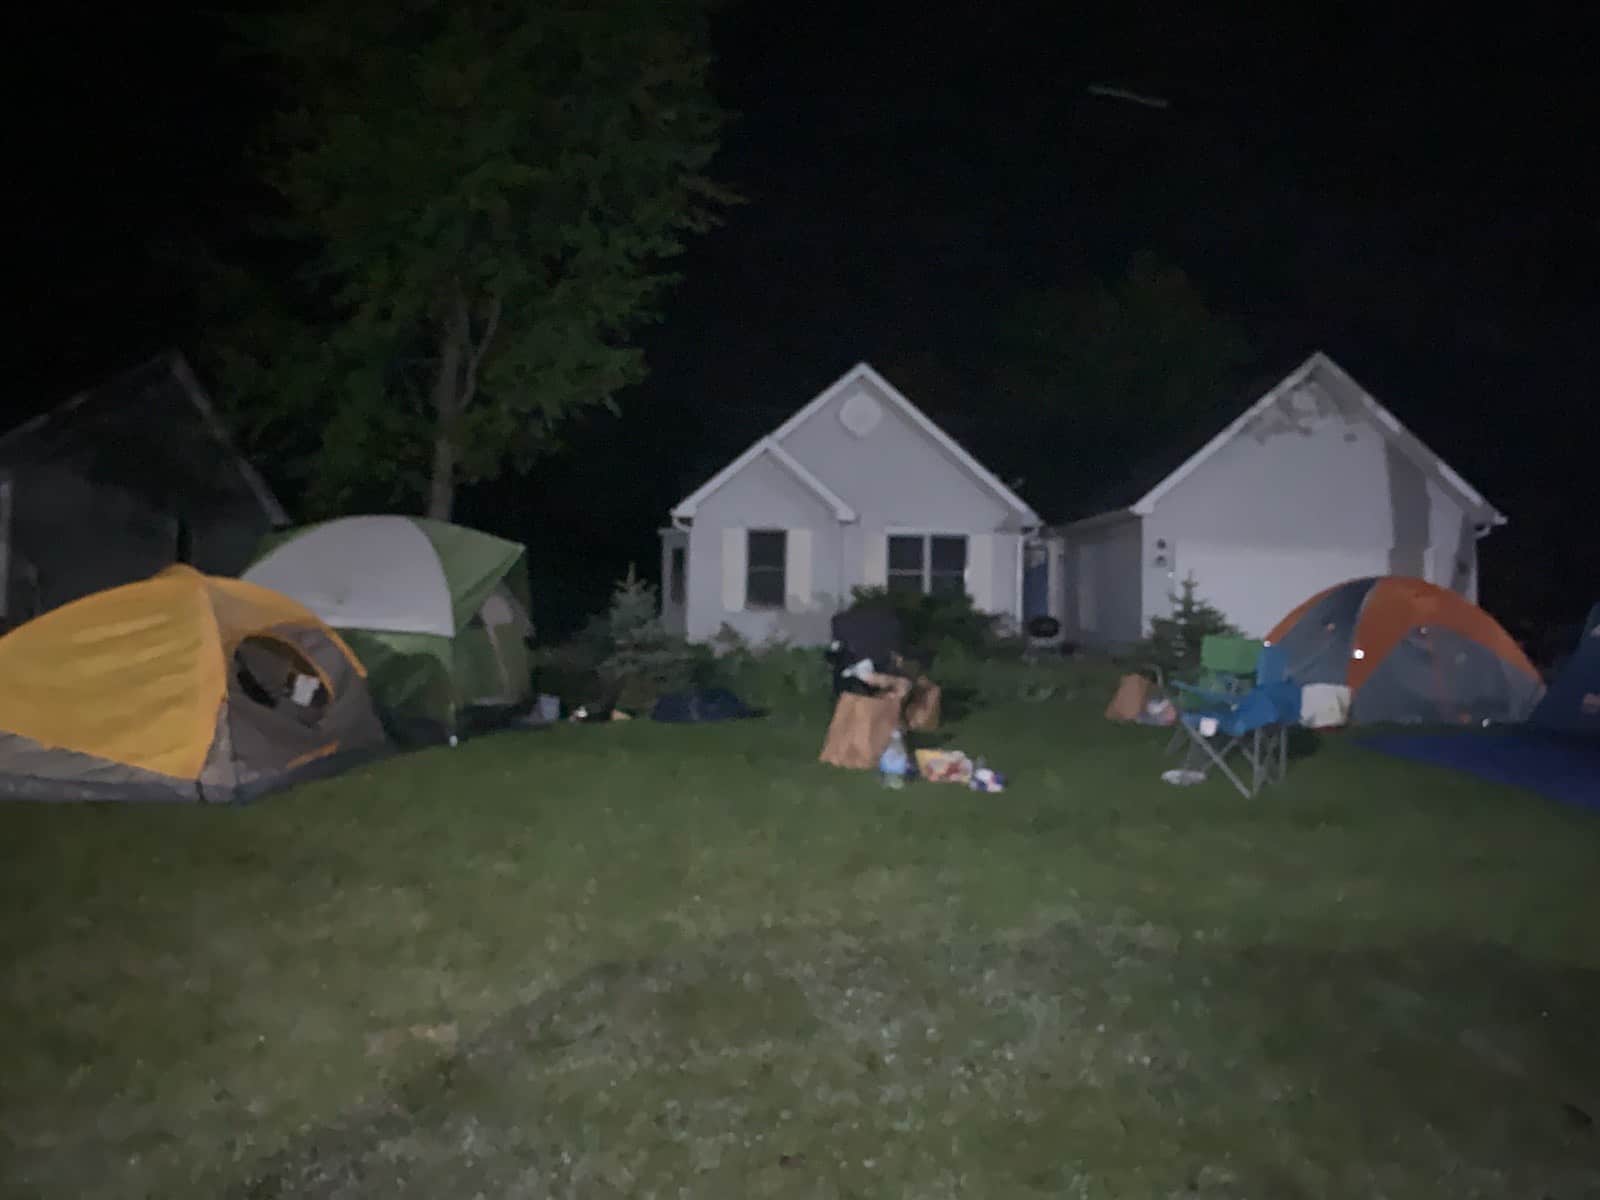 ‘Solidarity campers’ spend seven straight nights on Cayuga Nation soil in Seneca County to stave off fears of possible eviction scares